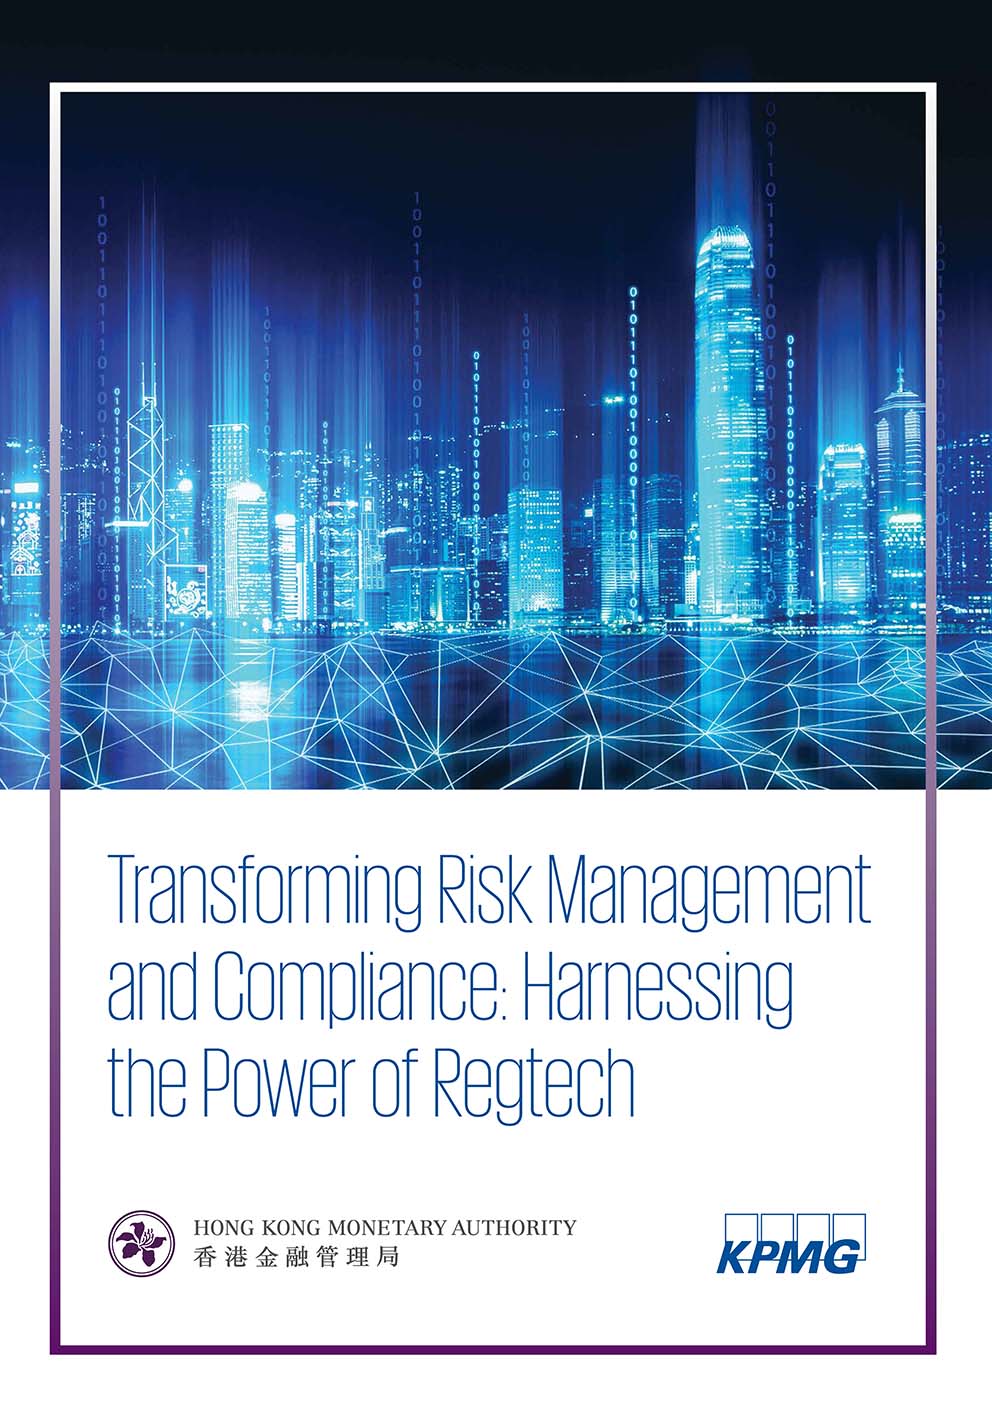 Transforming Risk Management and Compliance: Harnessing the Power of Regtech